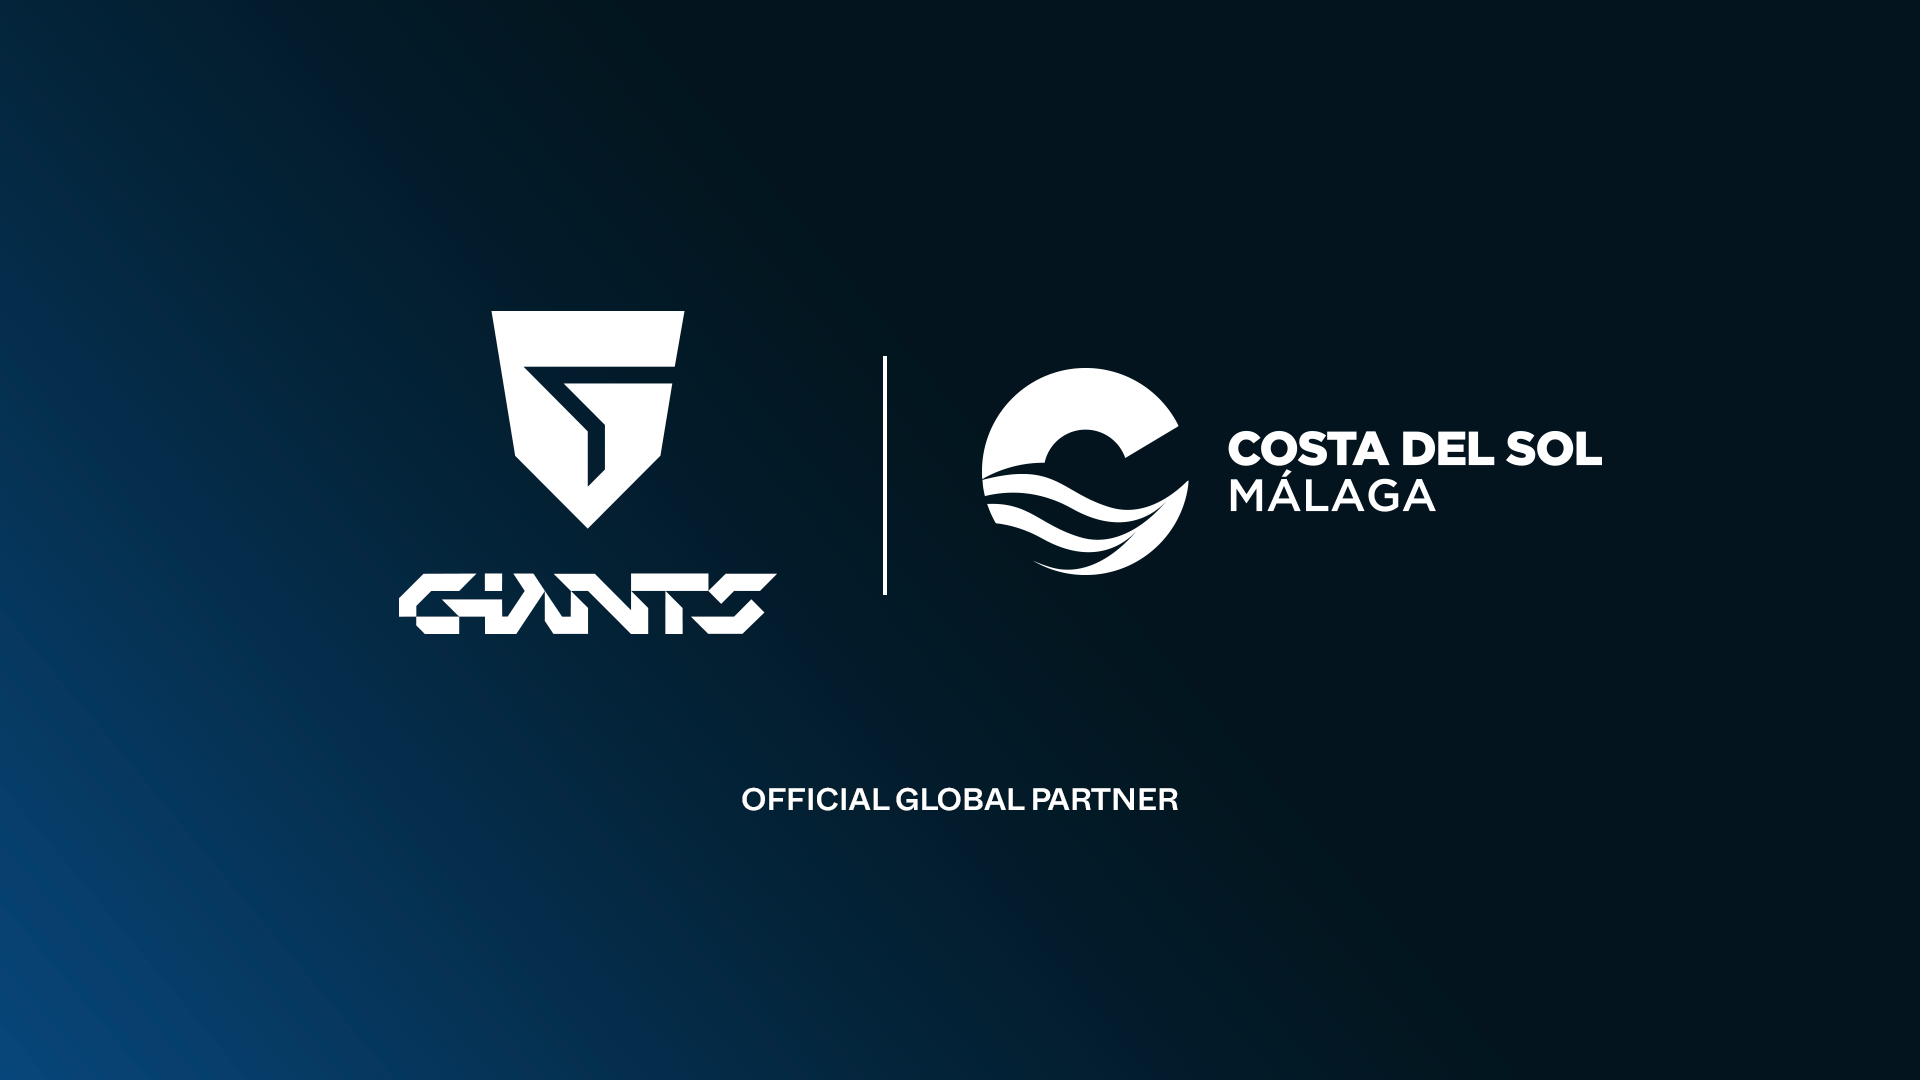 Giants Gaming partners with Costa del Sol region